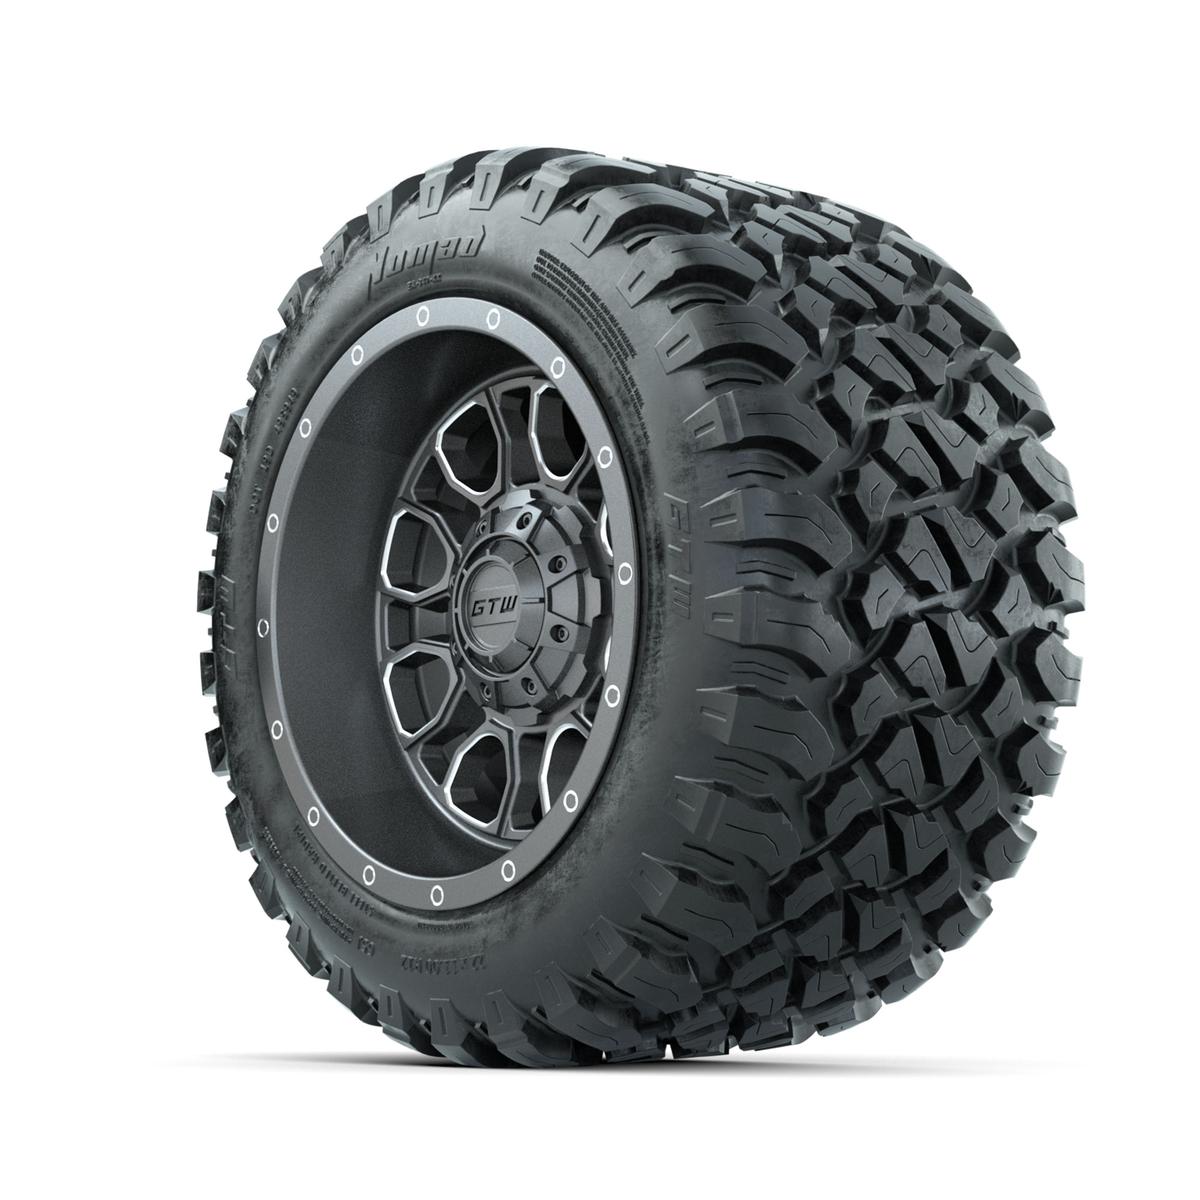 GTW Volt Gunmetal/Machined 12 in Wheels with 22x11-R12 Nomad All Terrain Tires – Full Set